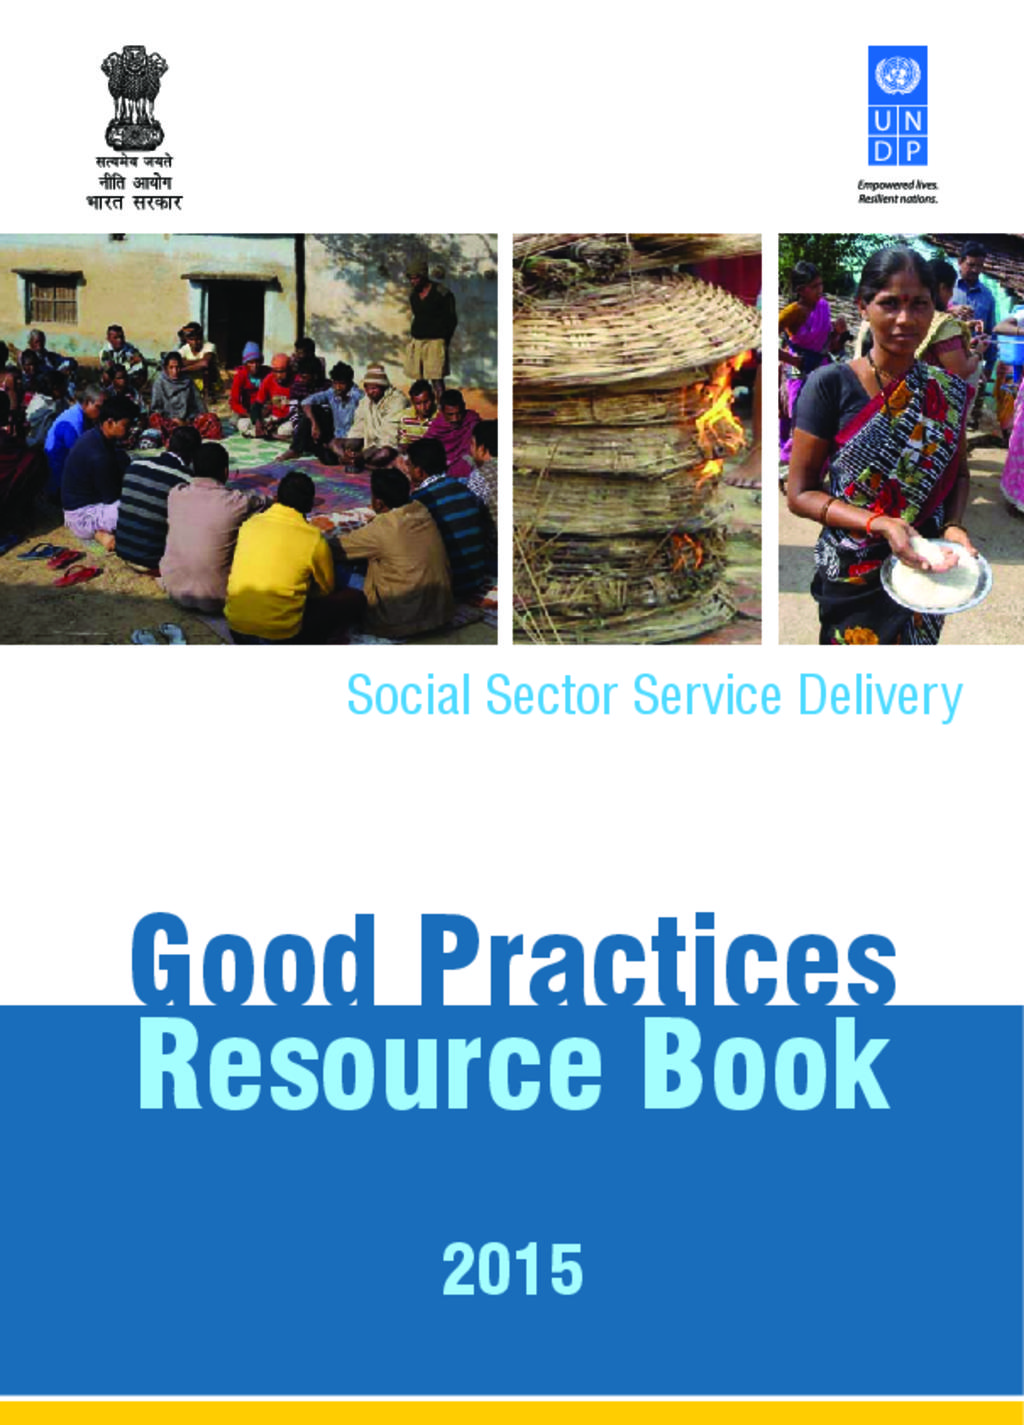 Social sector in India